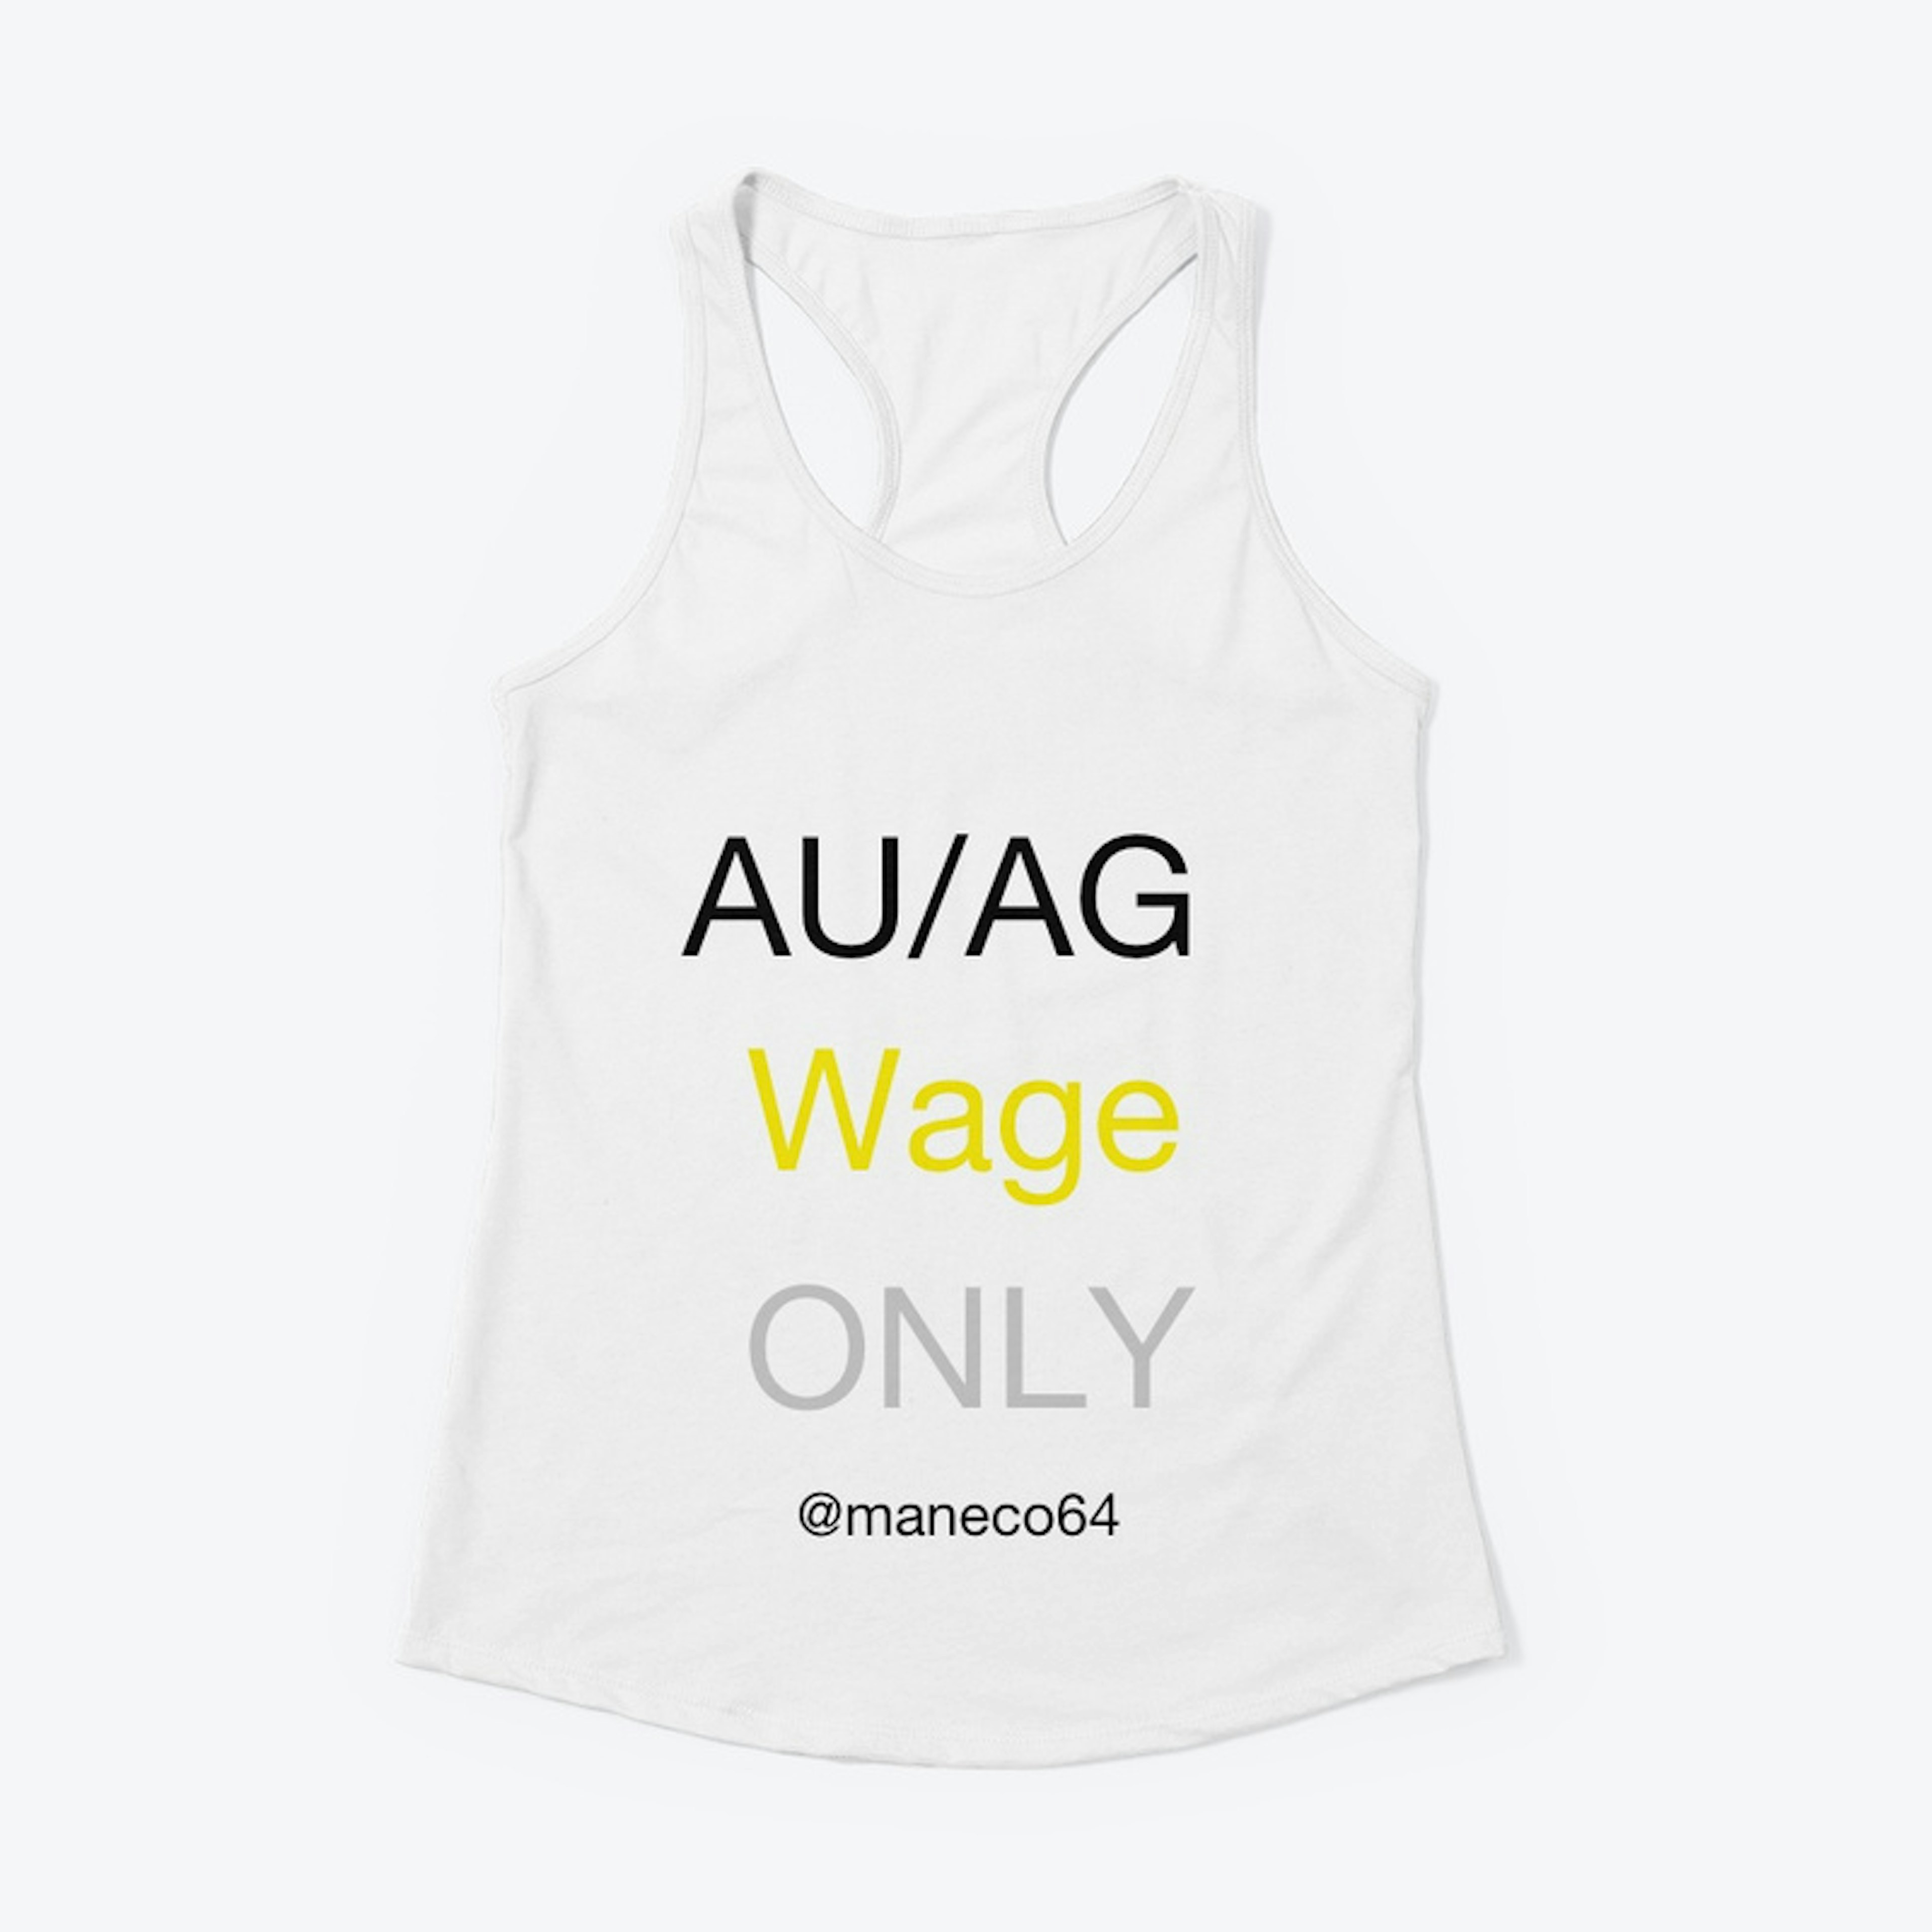 AU/AG Wage ONLY